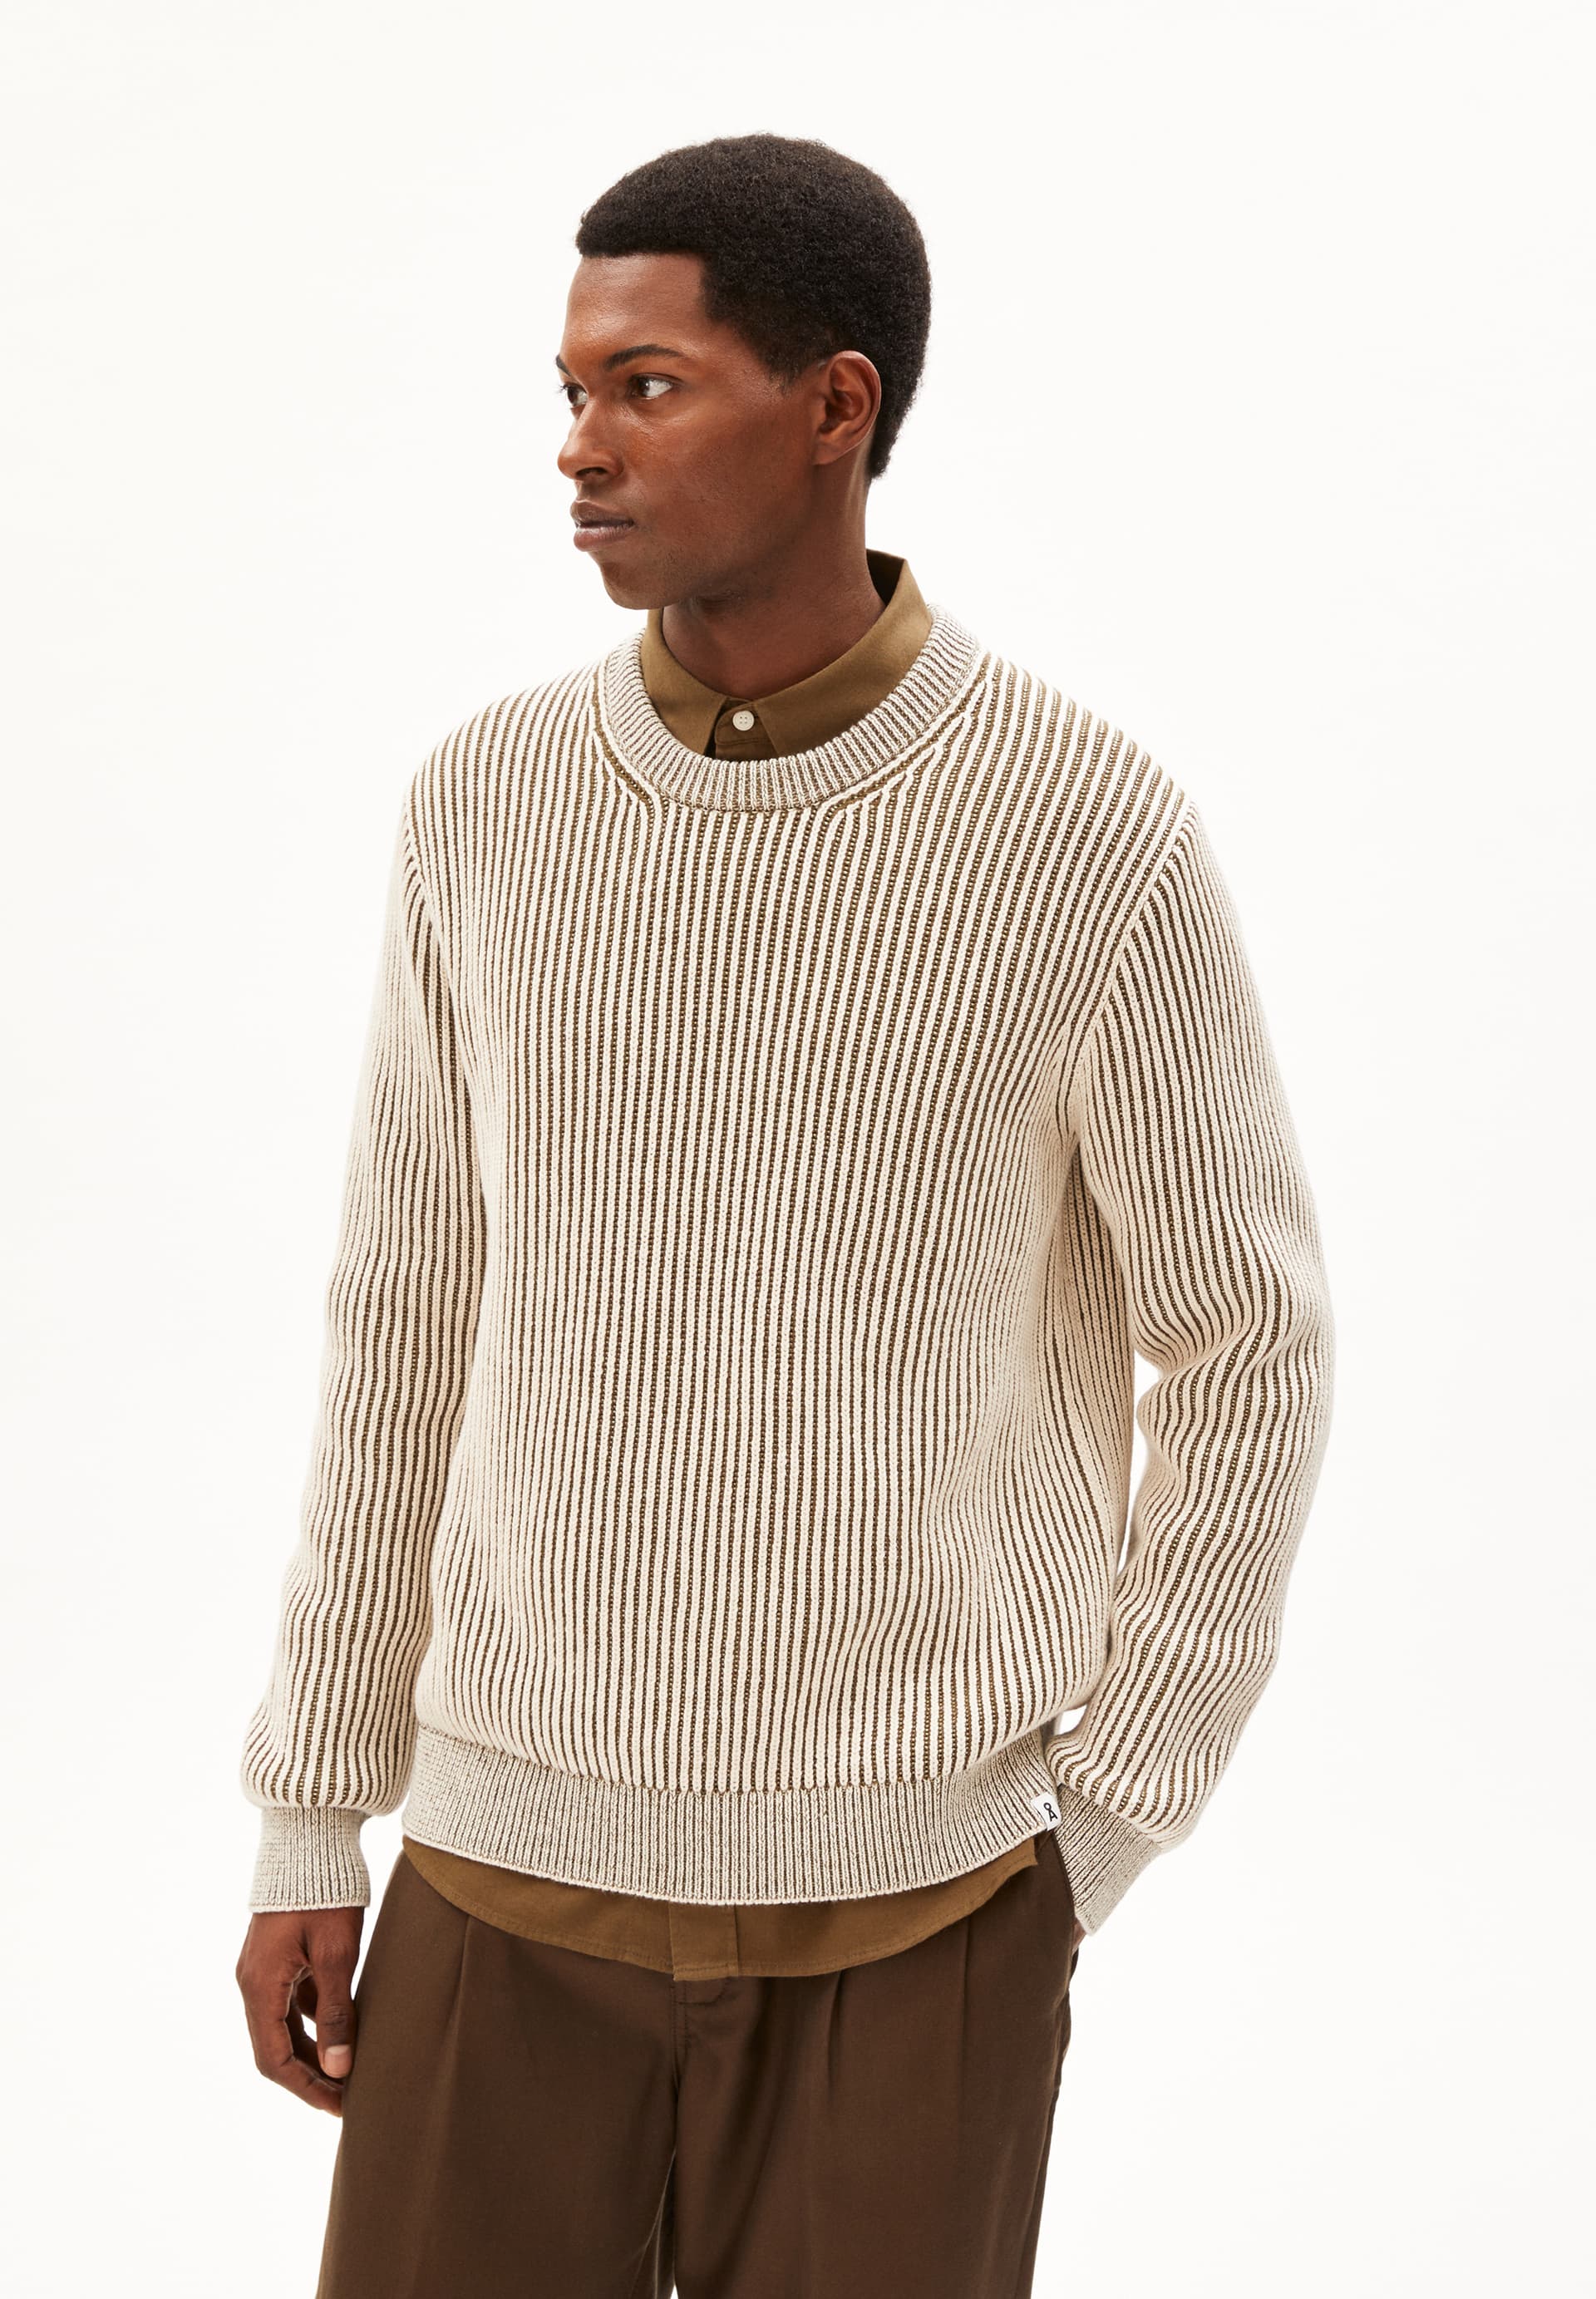 ANDRAAS Sweater Regular Fit made of Organic Cotton